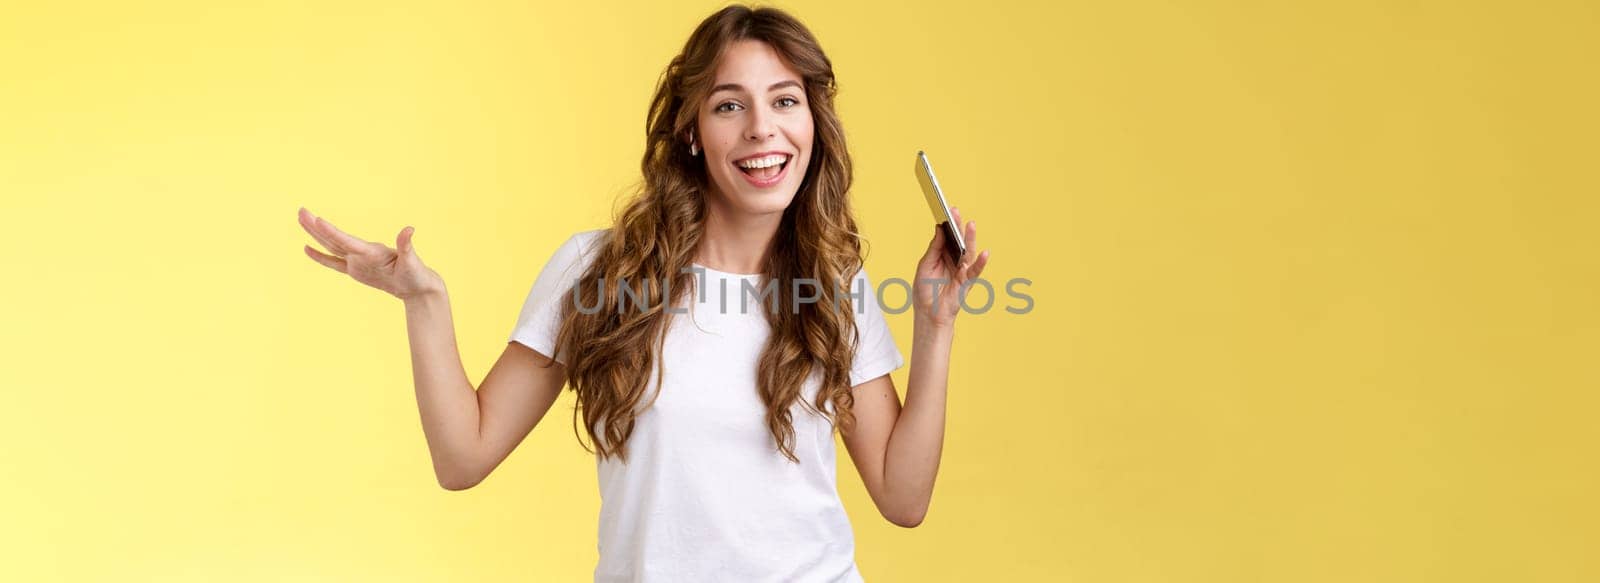 Sassy cheerful carefree attractive modern girl curly hairstyle having fun lively upbeat mood moving body rhythm shake hands hold smartphone lip sync wear wireless earbuds listen music dancing. Lifestyle.